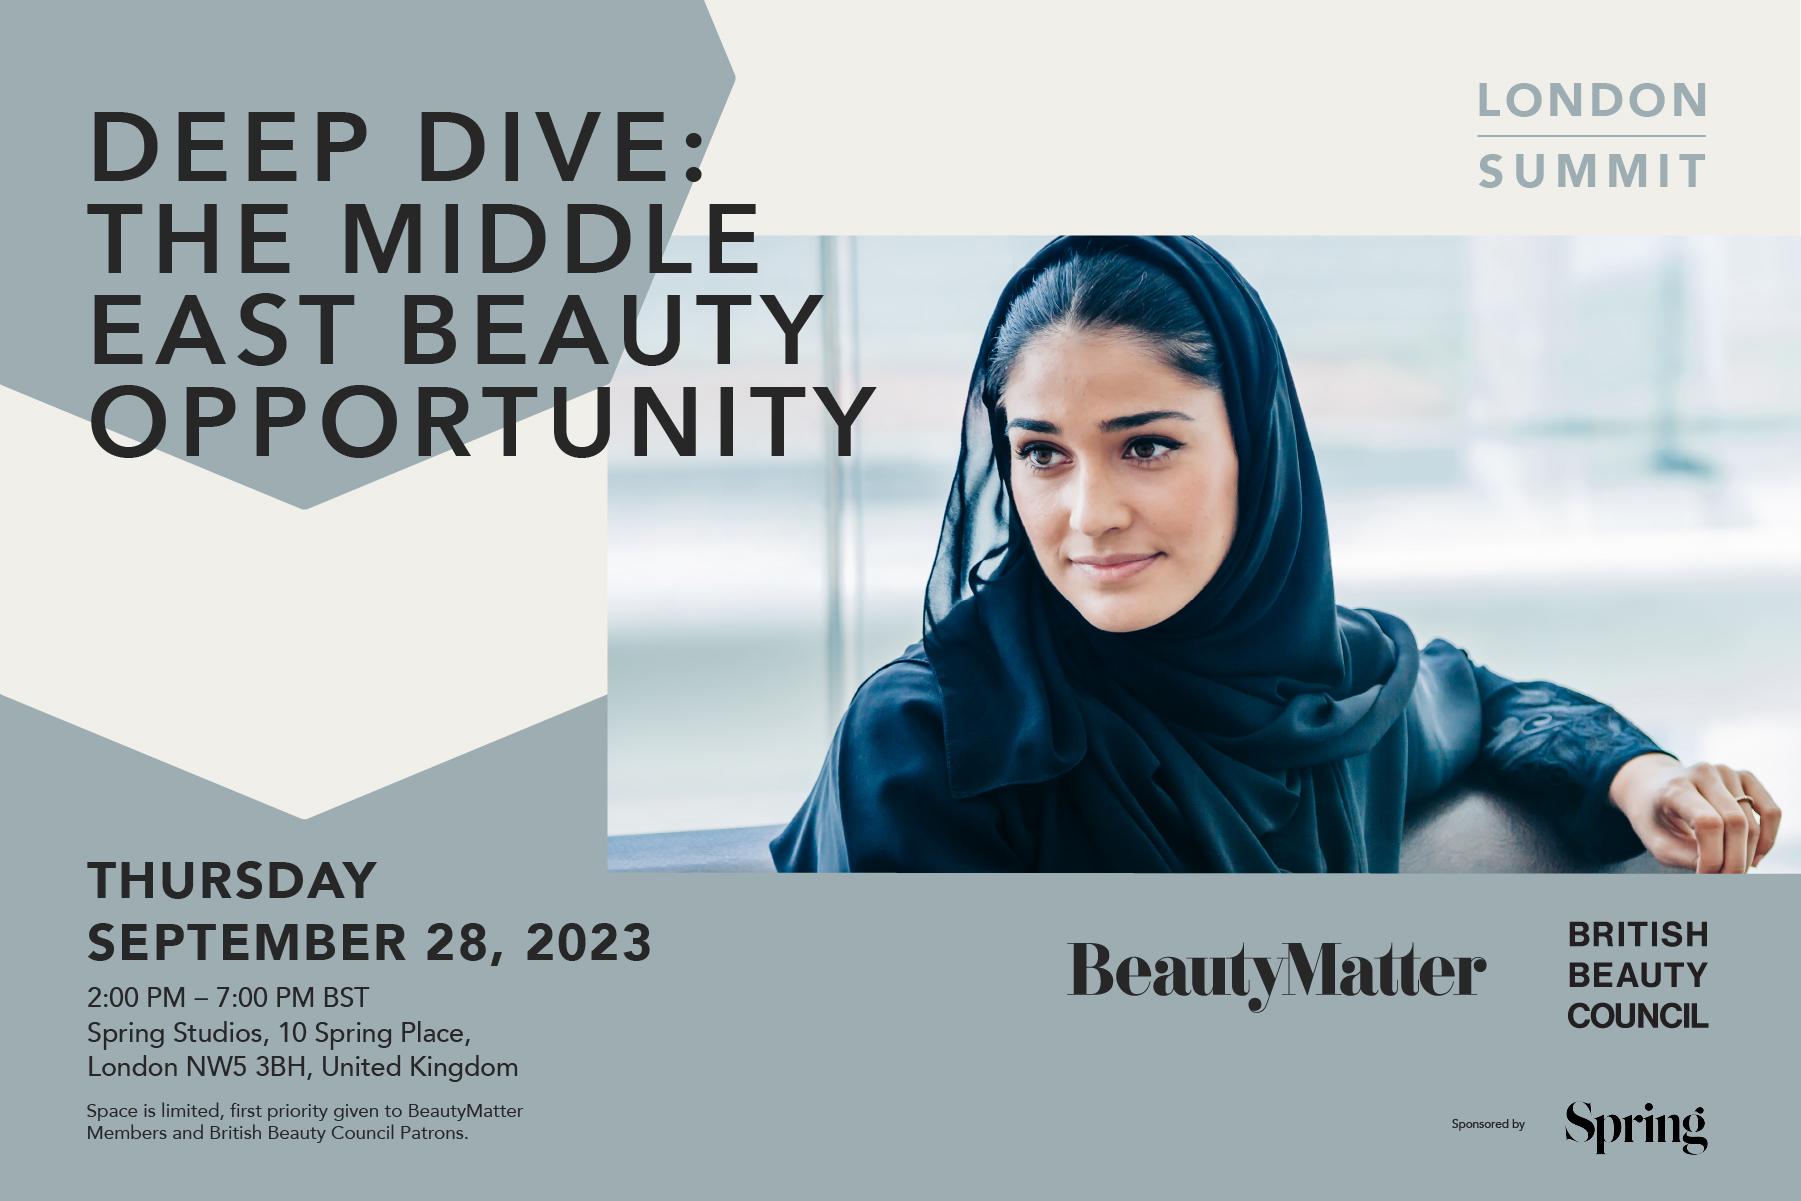 The Middle East Opportunity